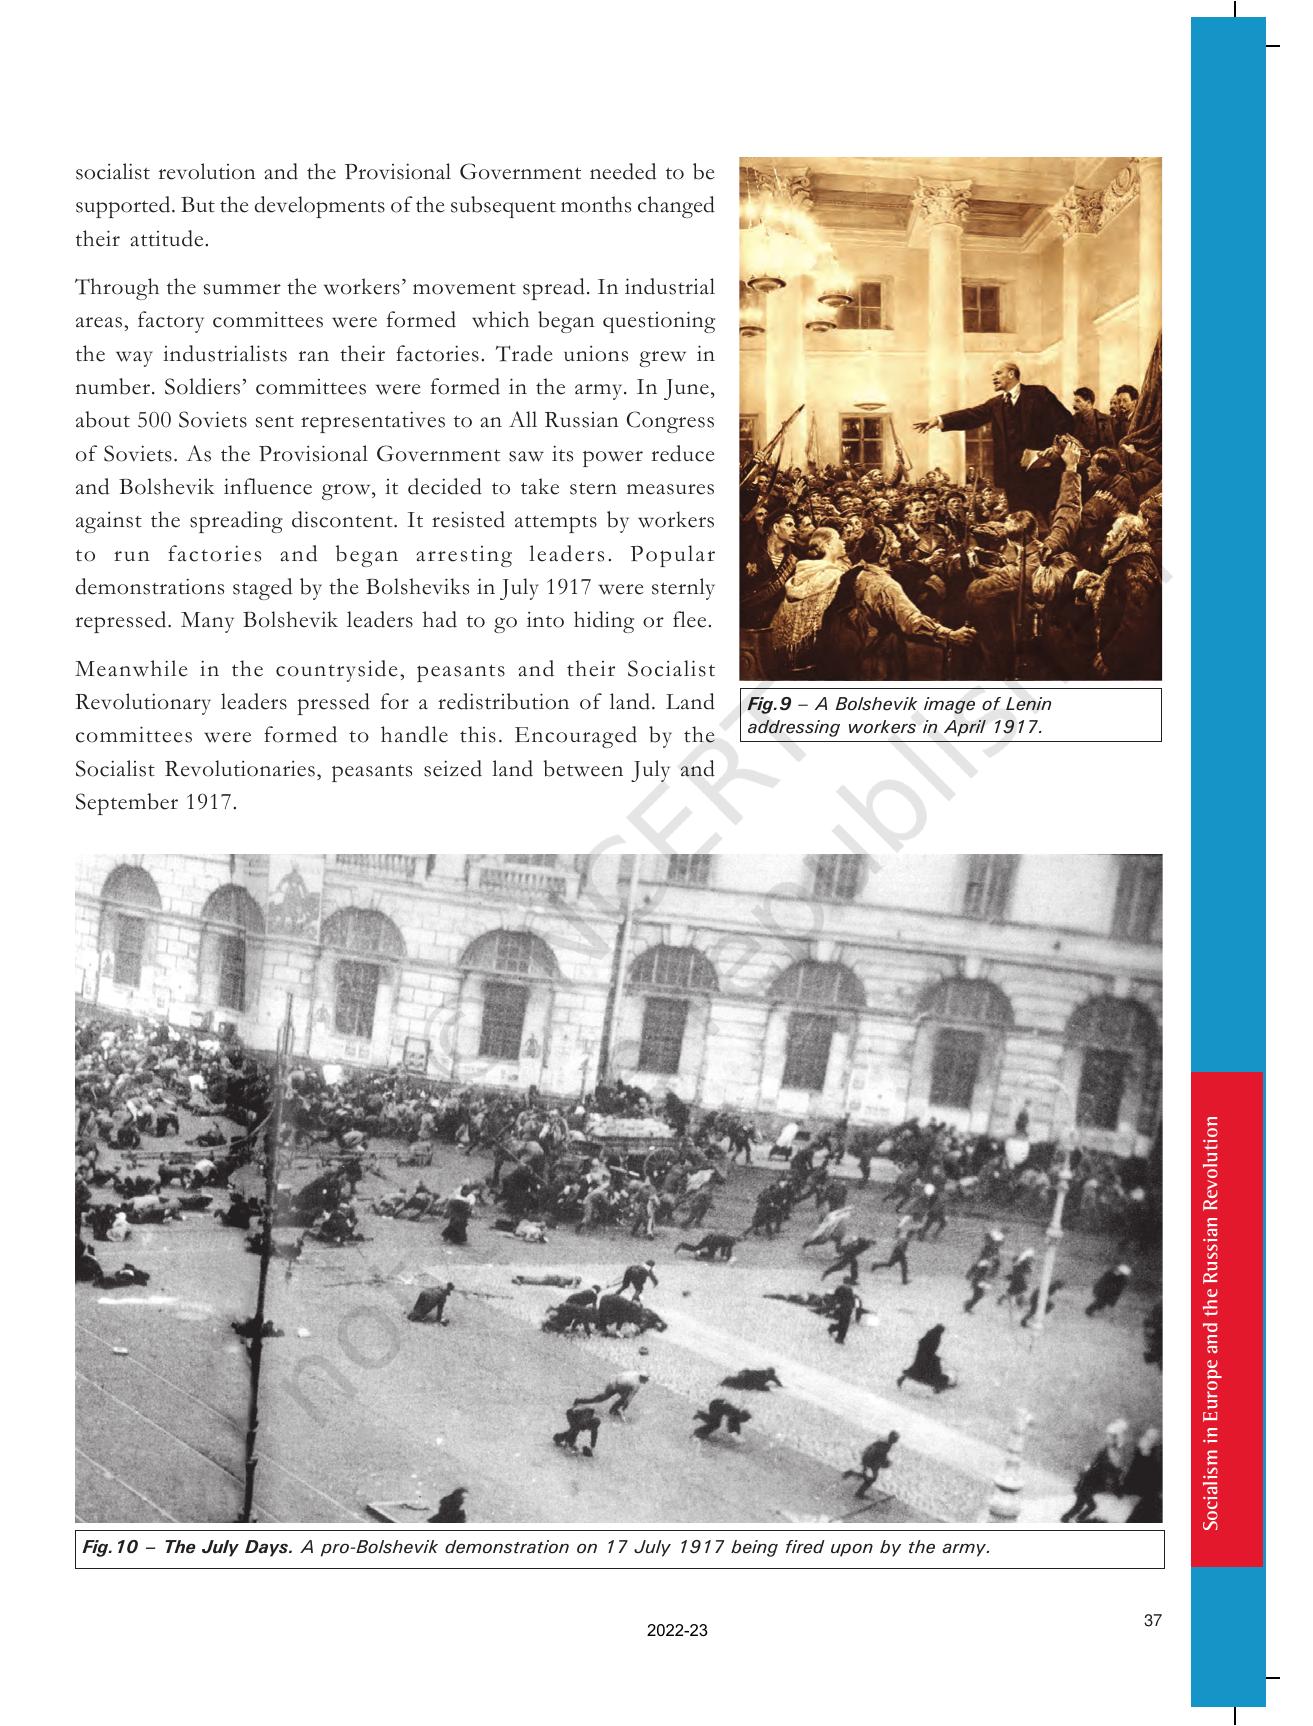 NCERT Book for Class 9 History Chapter 2 Socialism in Europe and the Russian Revolution - Page 13